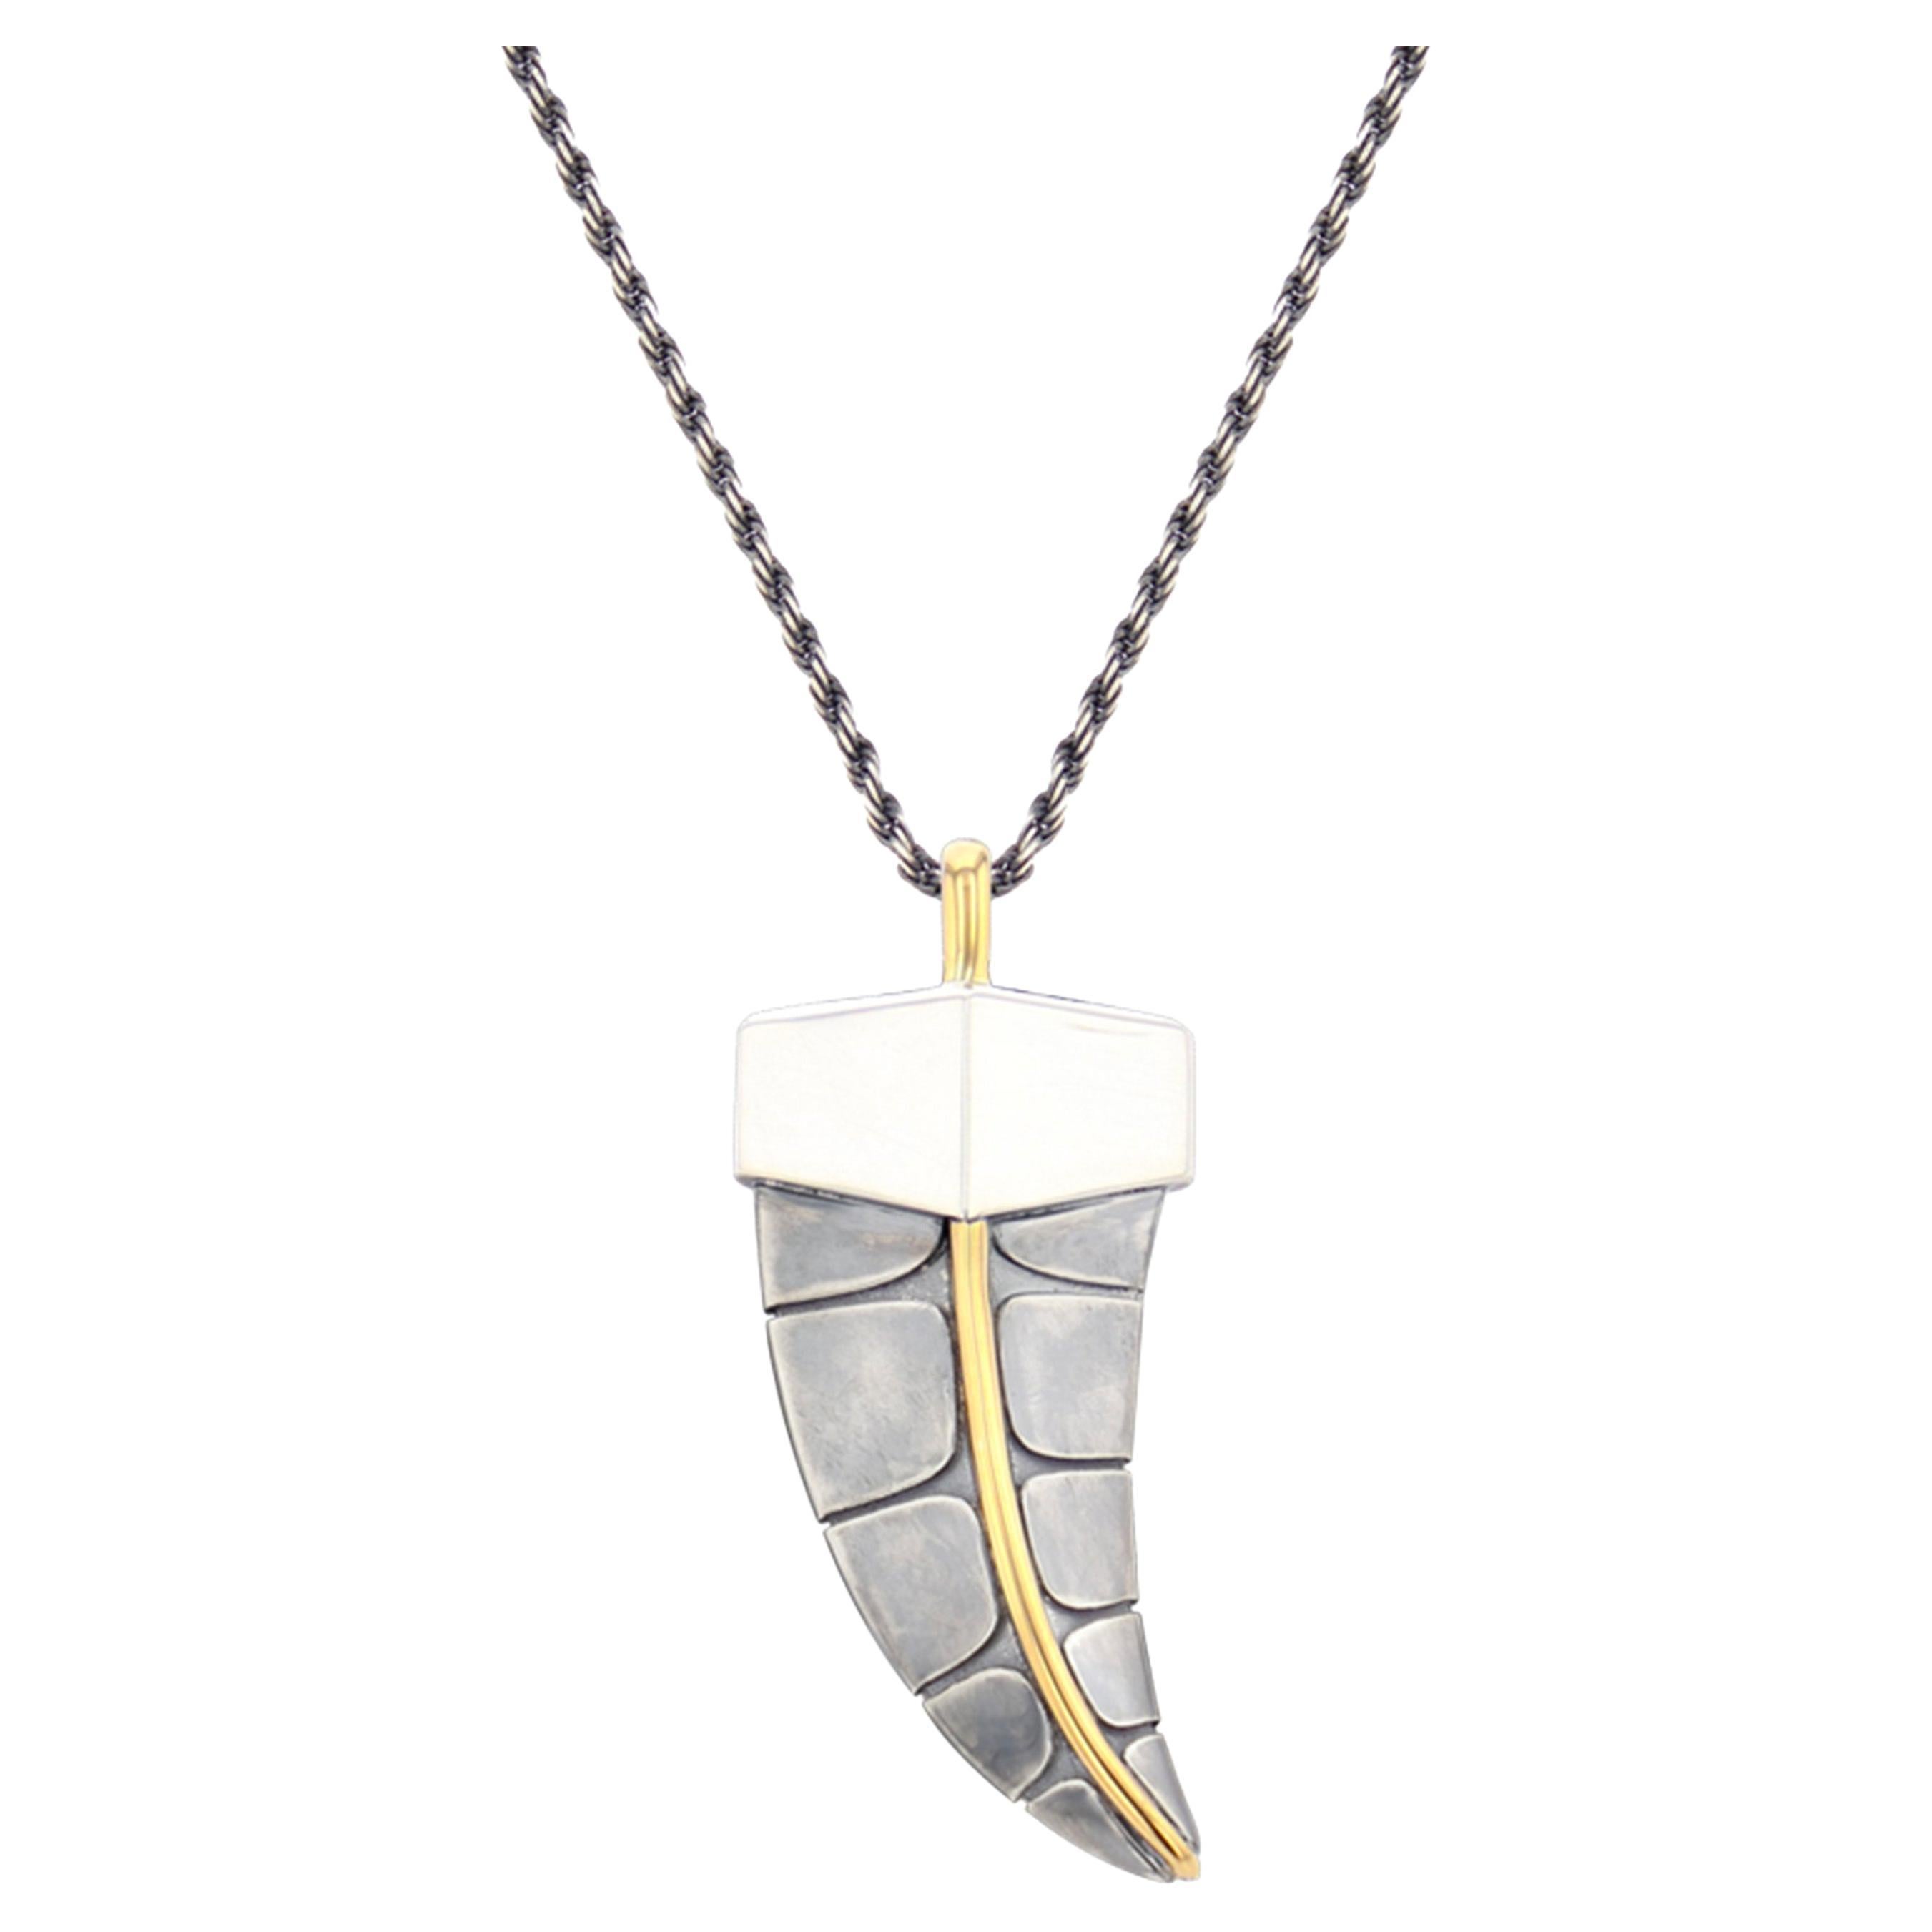 Griffe Pendant in 18k Yellow Gold & Distressed Silver by Elie Top